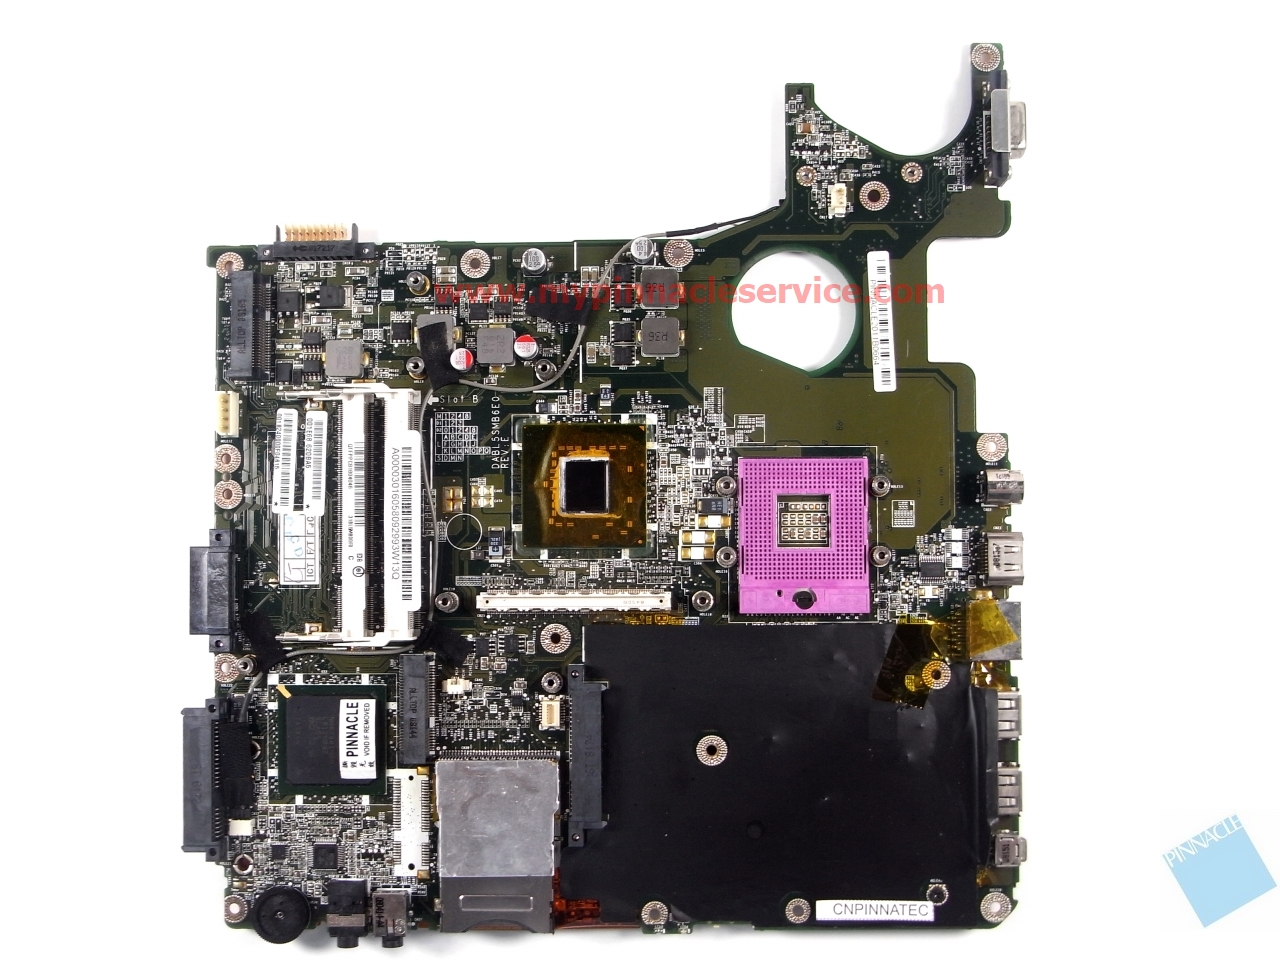 a000030160-motherboard-for-toshiba-satellite-a300-a305-p300-p305-dabl5smb6e0-31bl5mb00d0-rimg0077.jpg